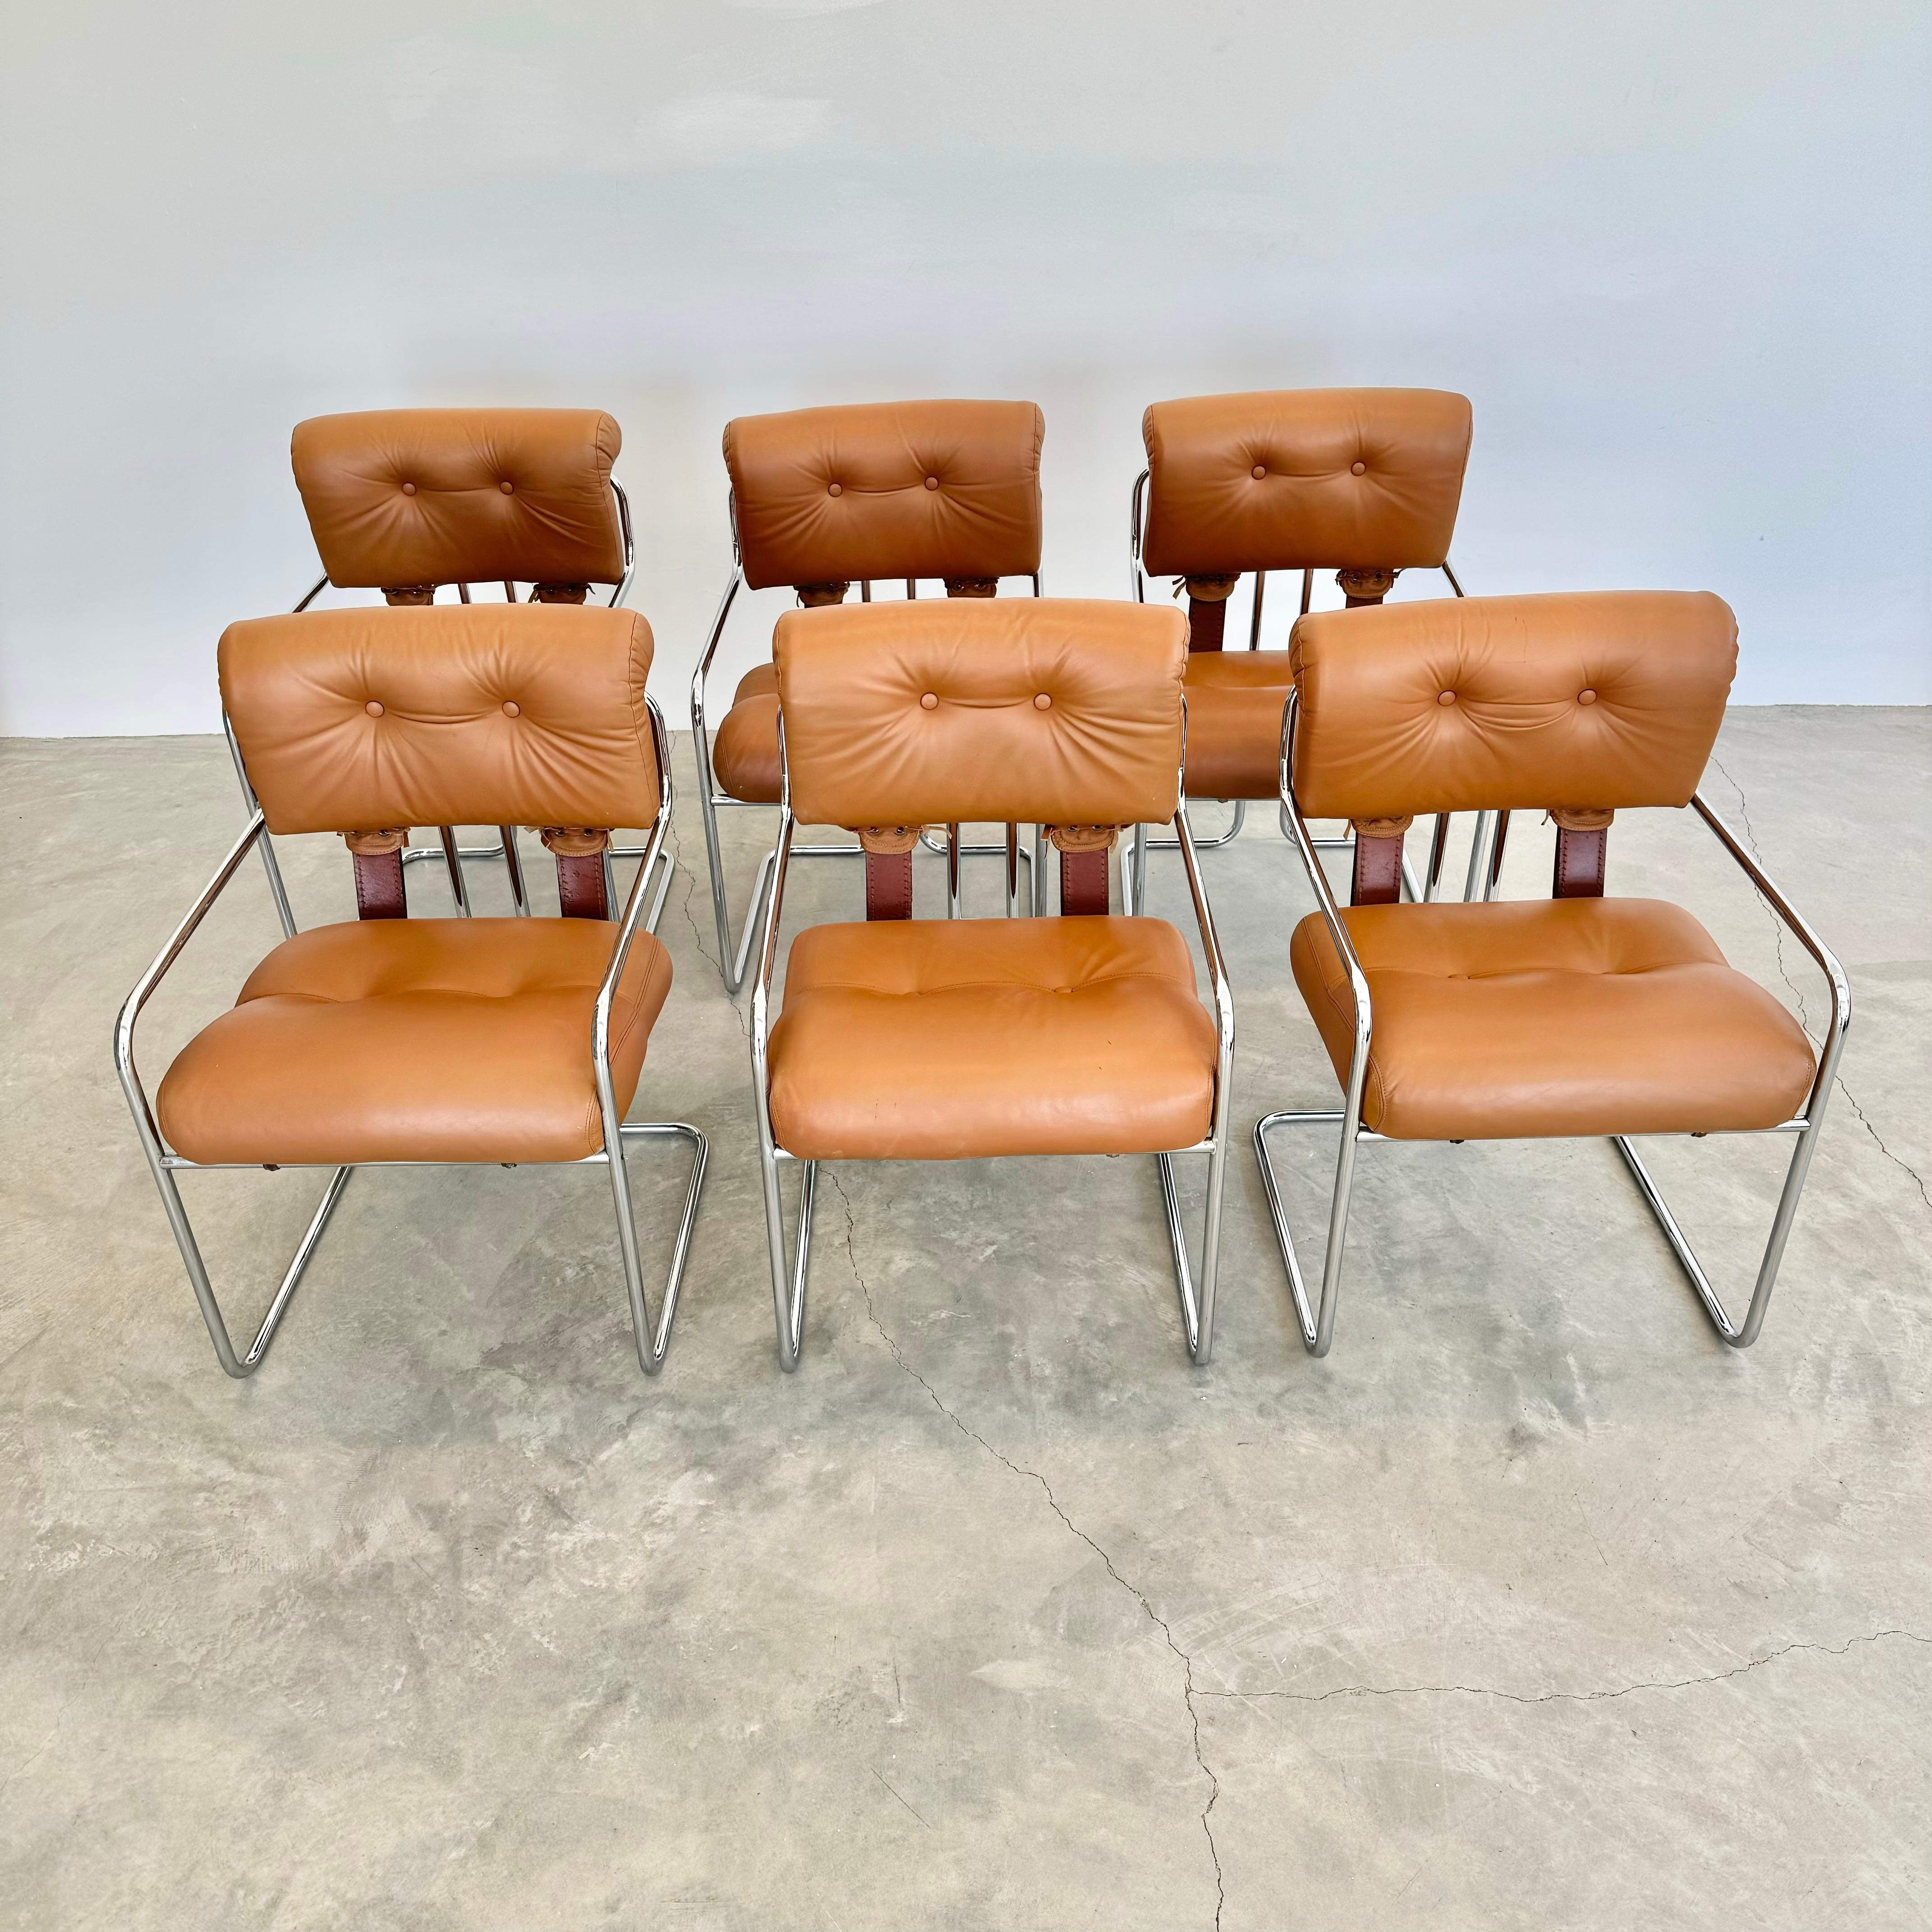 Italian Set of 6 'Tucroma' Chairs in Tan by Guido Faleschini, 1970s Italy For Sale